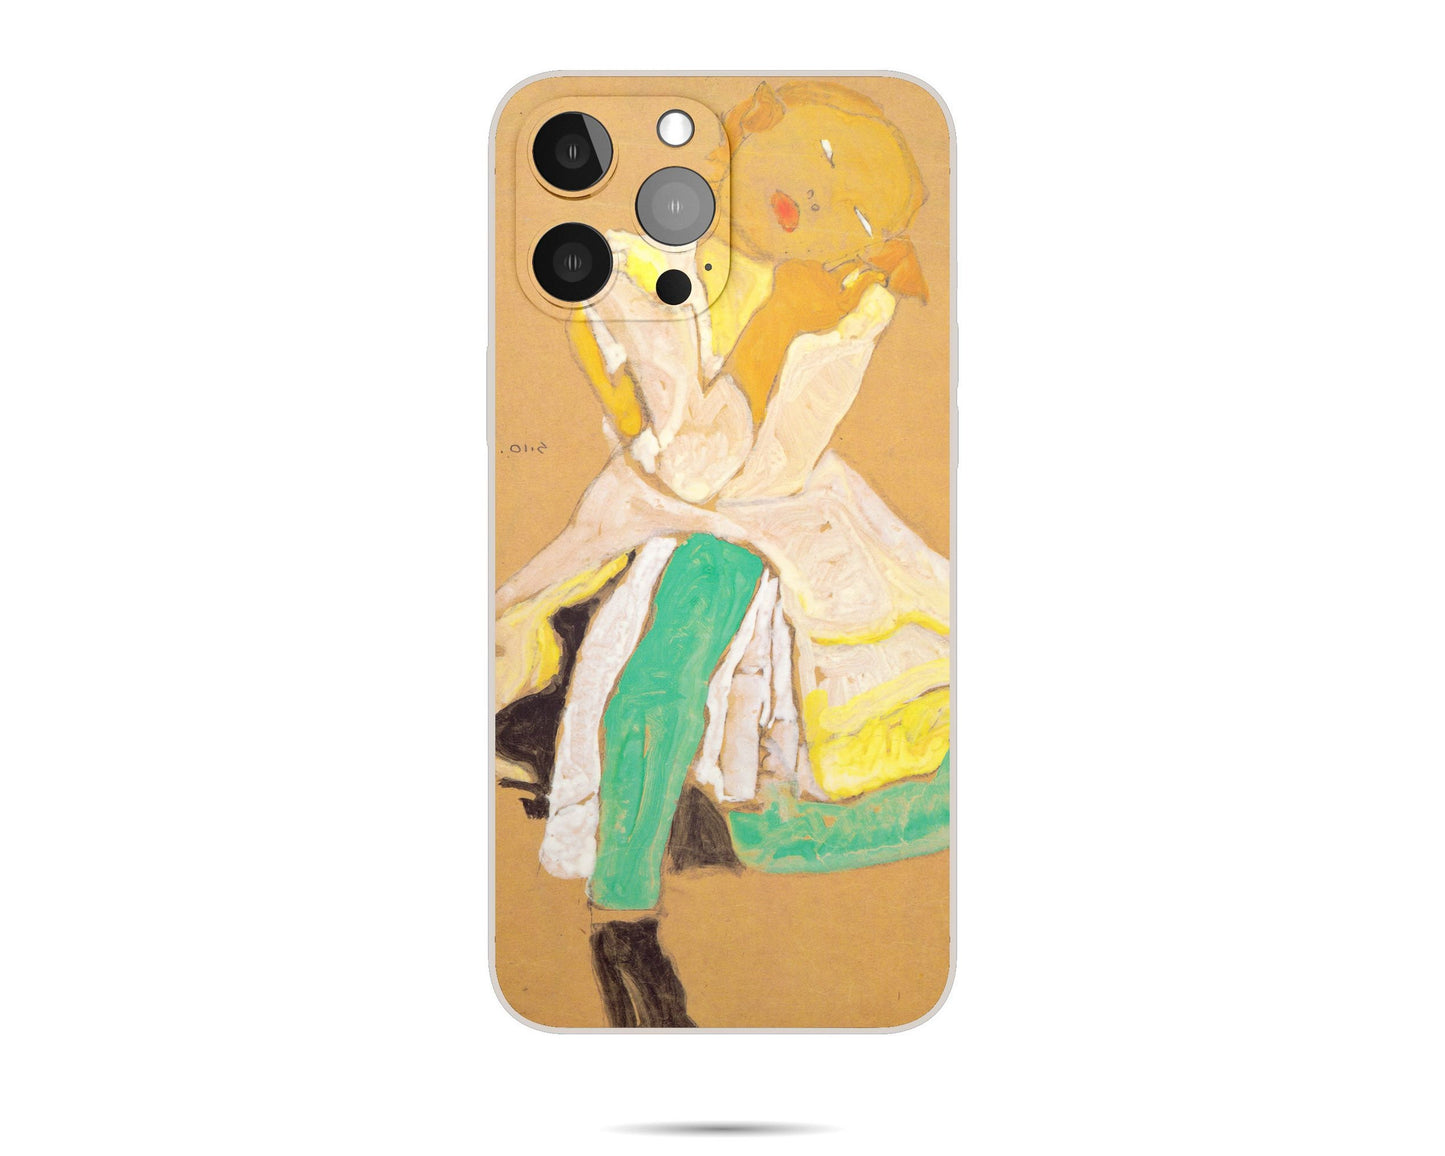 Iphone 14 Case Of Egon Schiele Famous Painting, Iphone Cover, Iphone 12, Iphone Se Case, Iphone Case Protective, Iphone Case Silicone